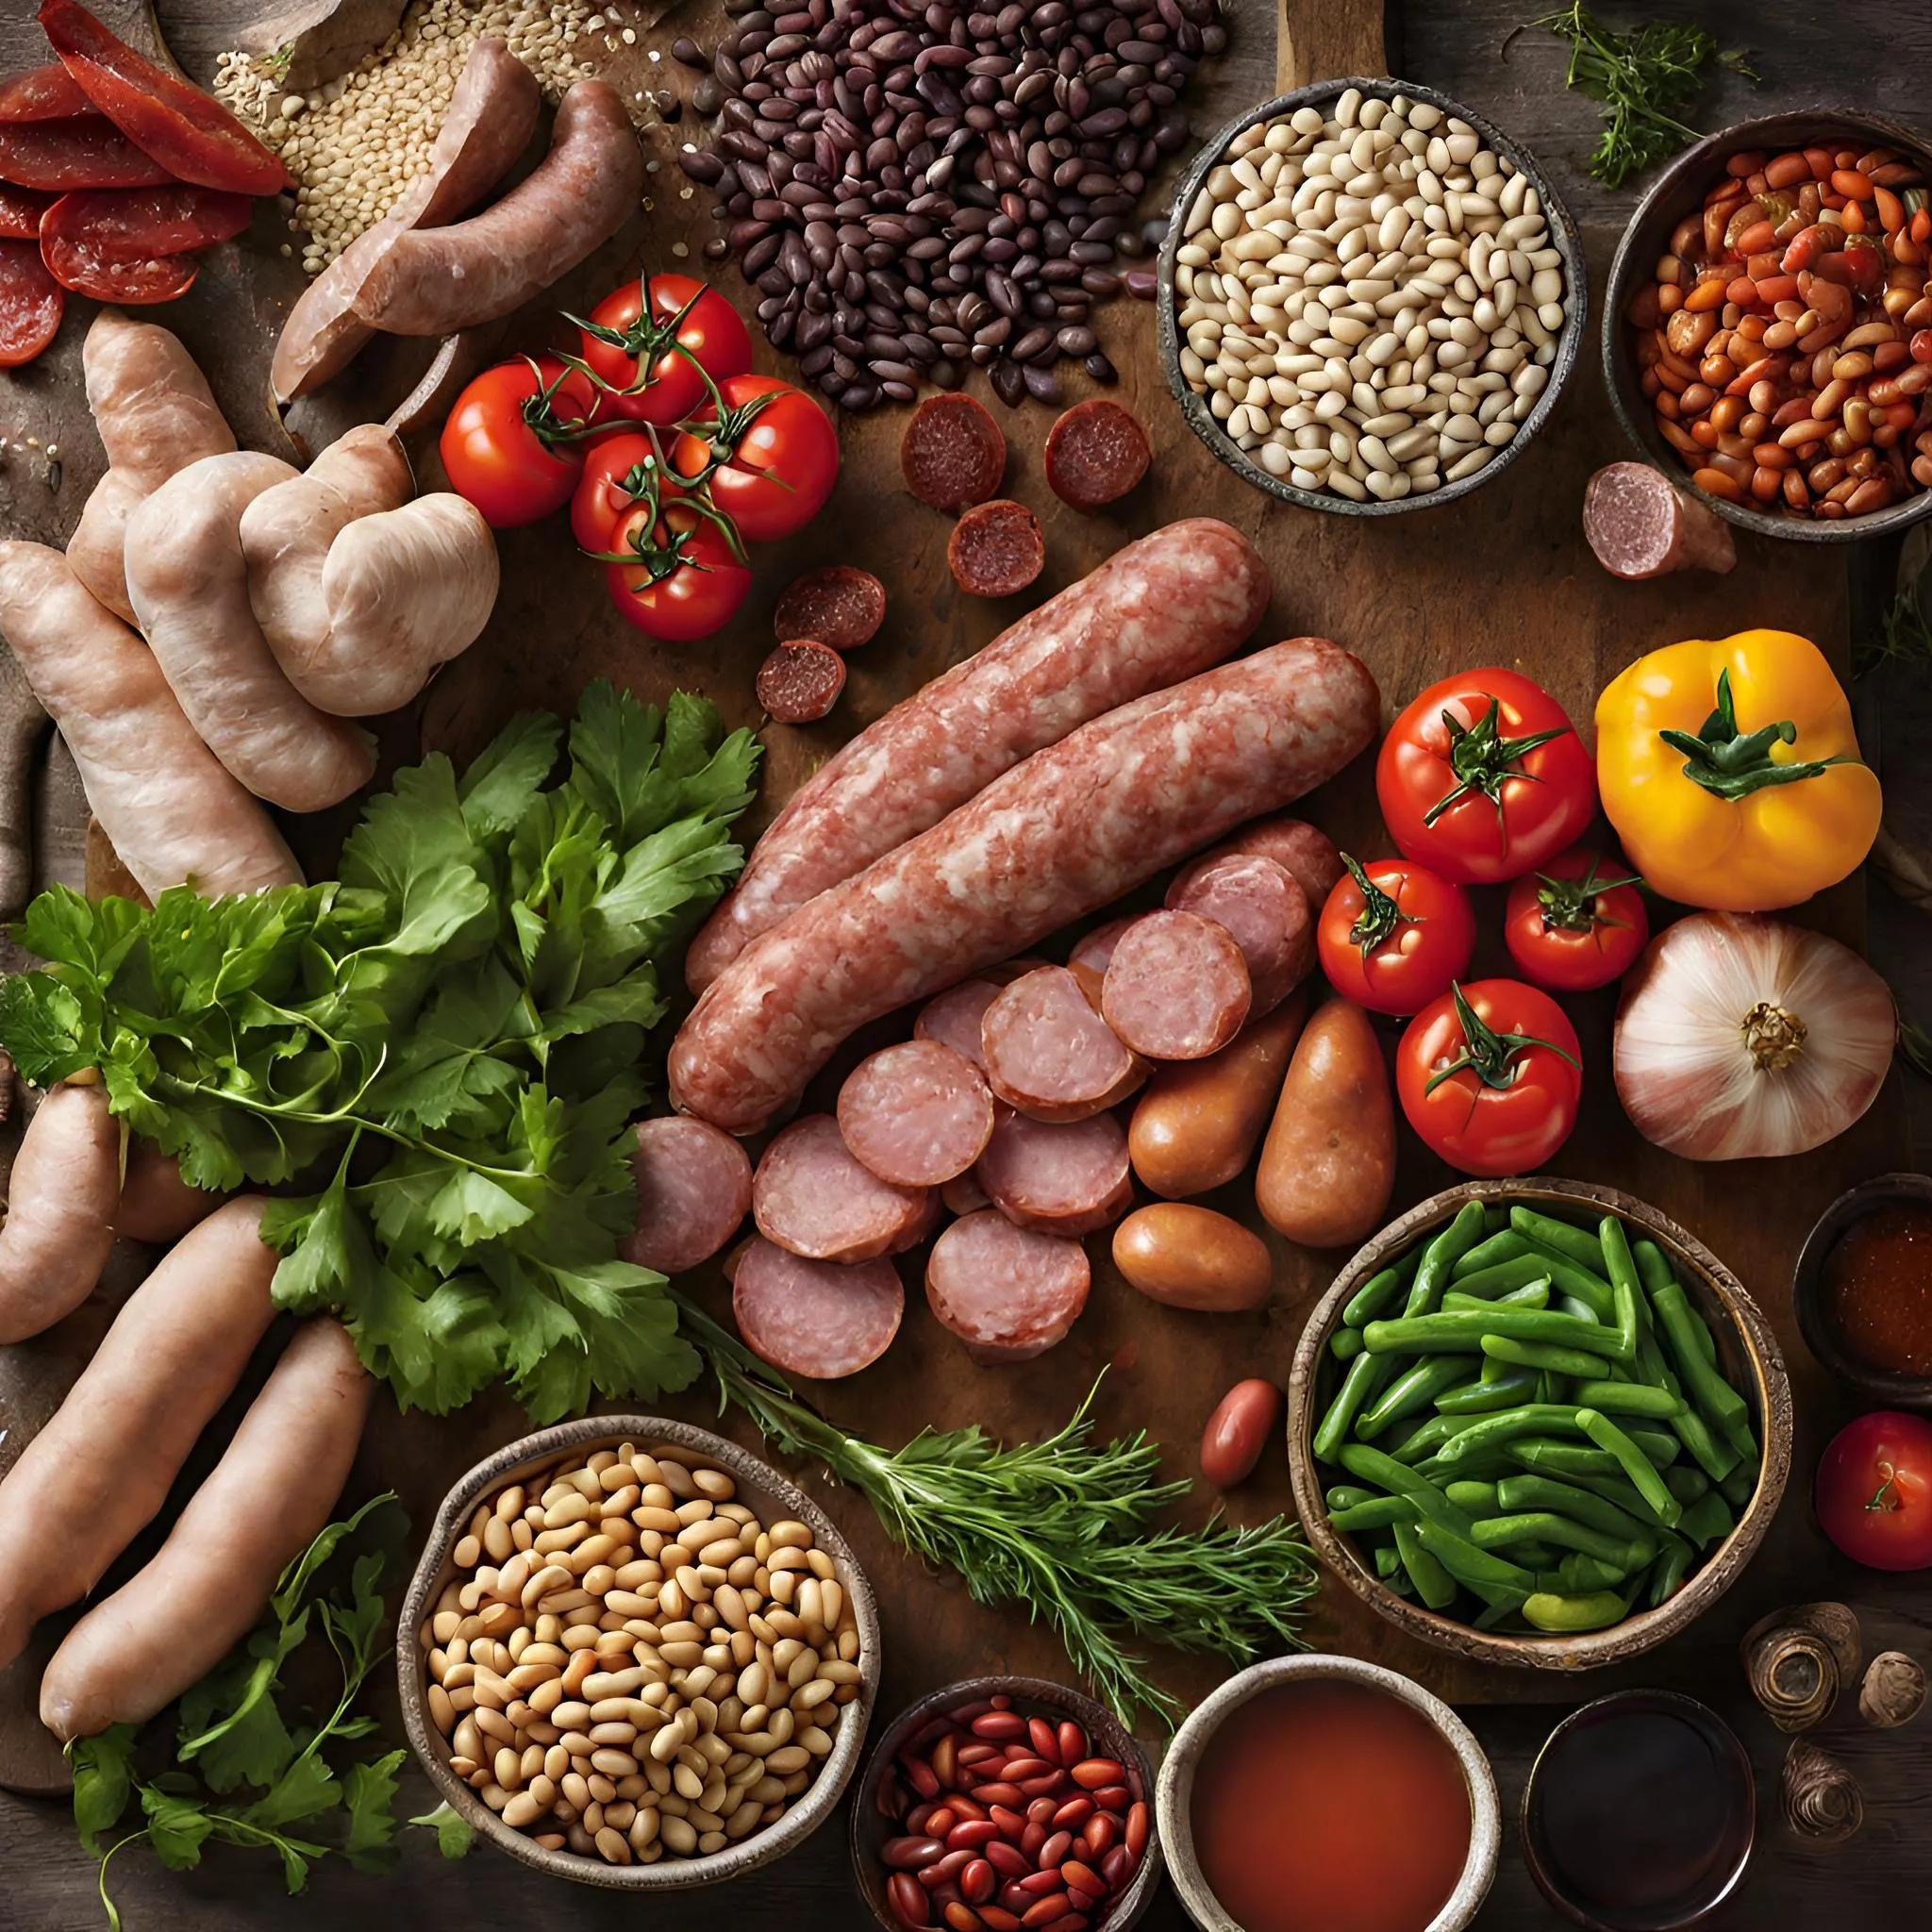 Ingredients for Portuguese bean soup recipe: A variety of ingredients are displayed on a wooden table, including beans, sausage, vegetables, and spices.